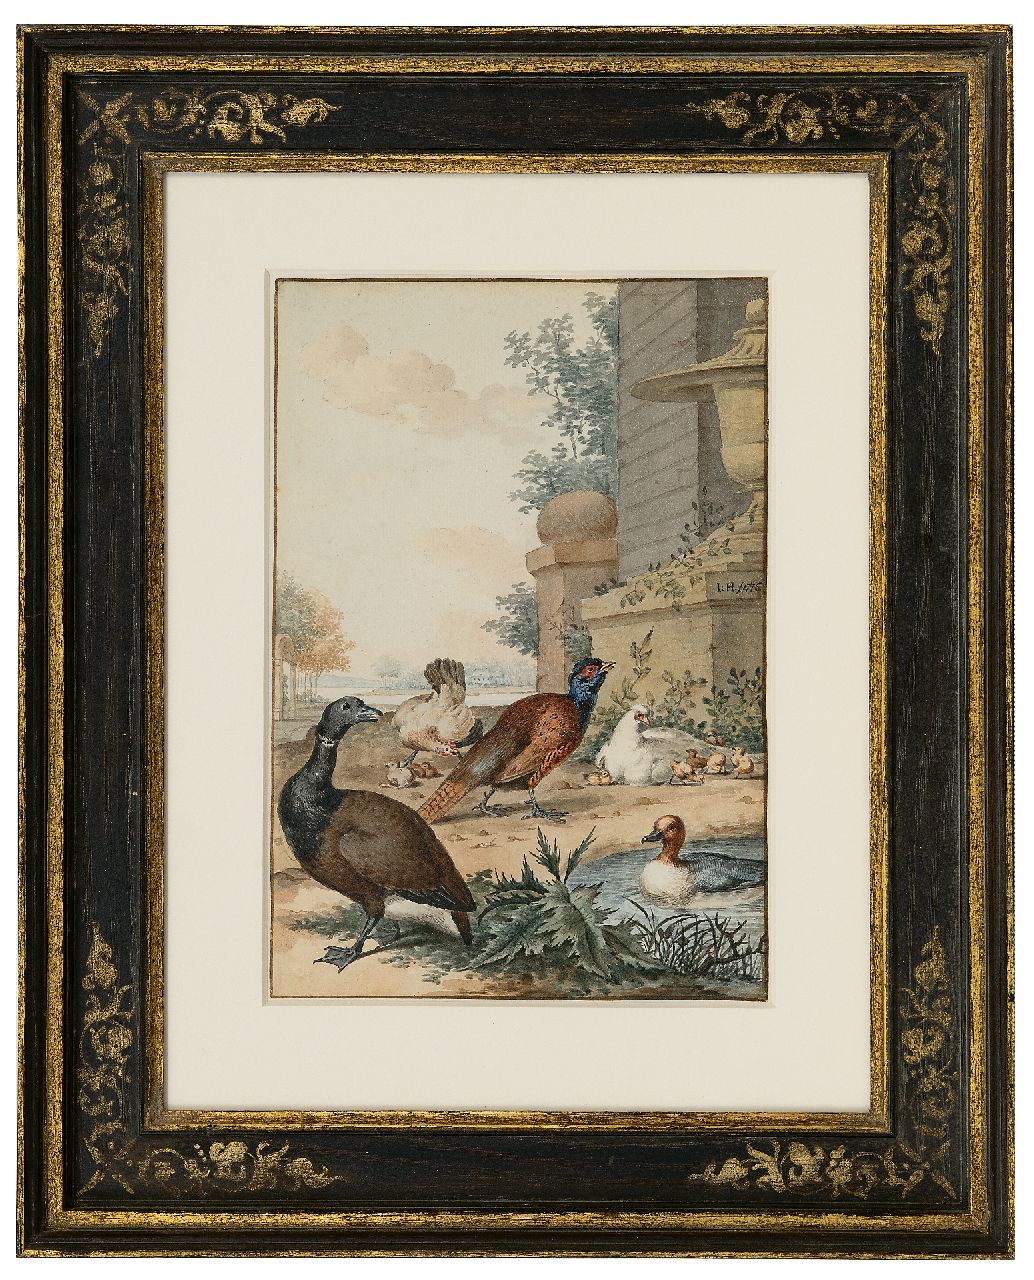 Heenck J.  | Jabez Heenck | Watercolours and drawings offered for sale | A pochard and other birds in a landscape, watercolour on paper 26.5 x 18.1 cm, signed c.r. with monogram and dated 1776